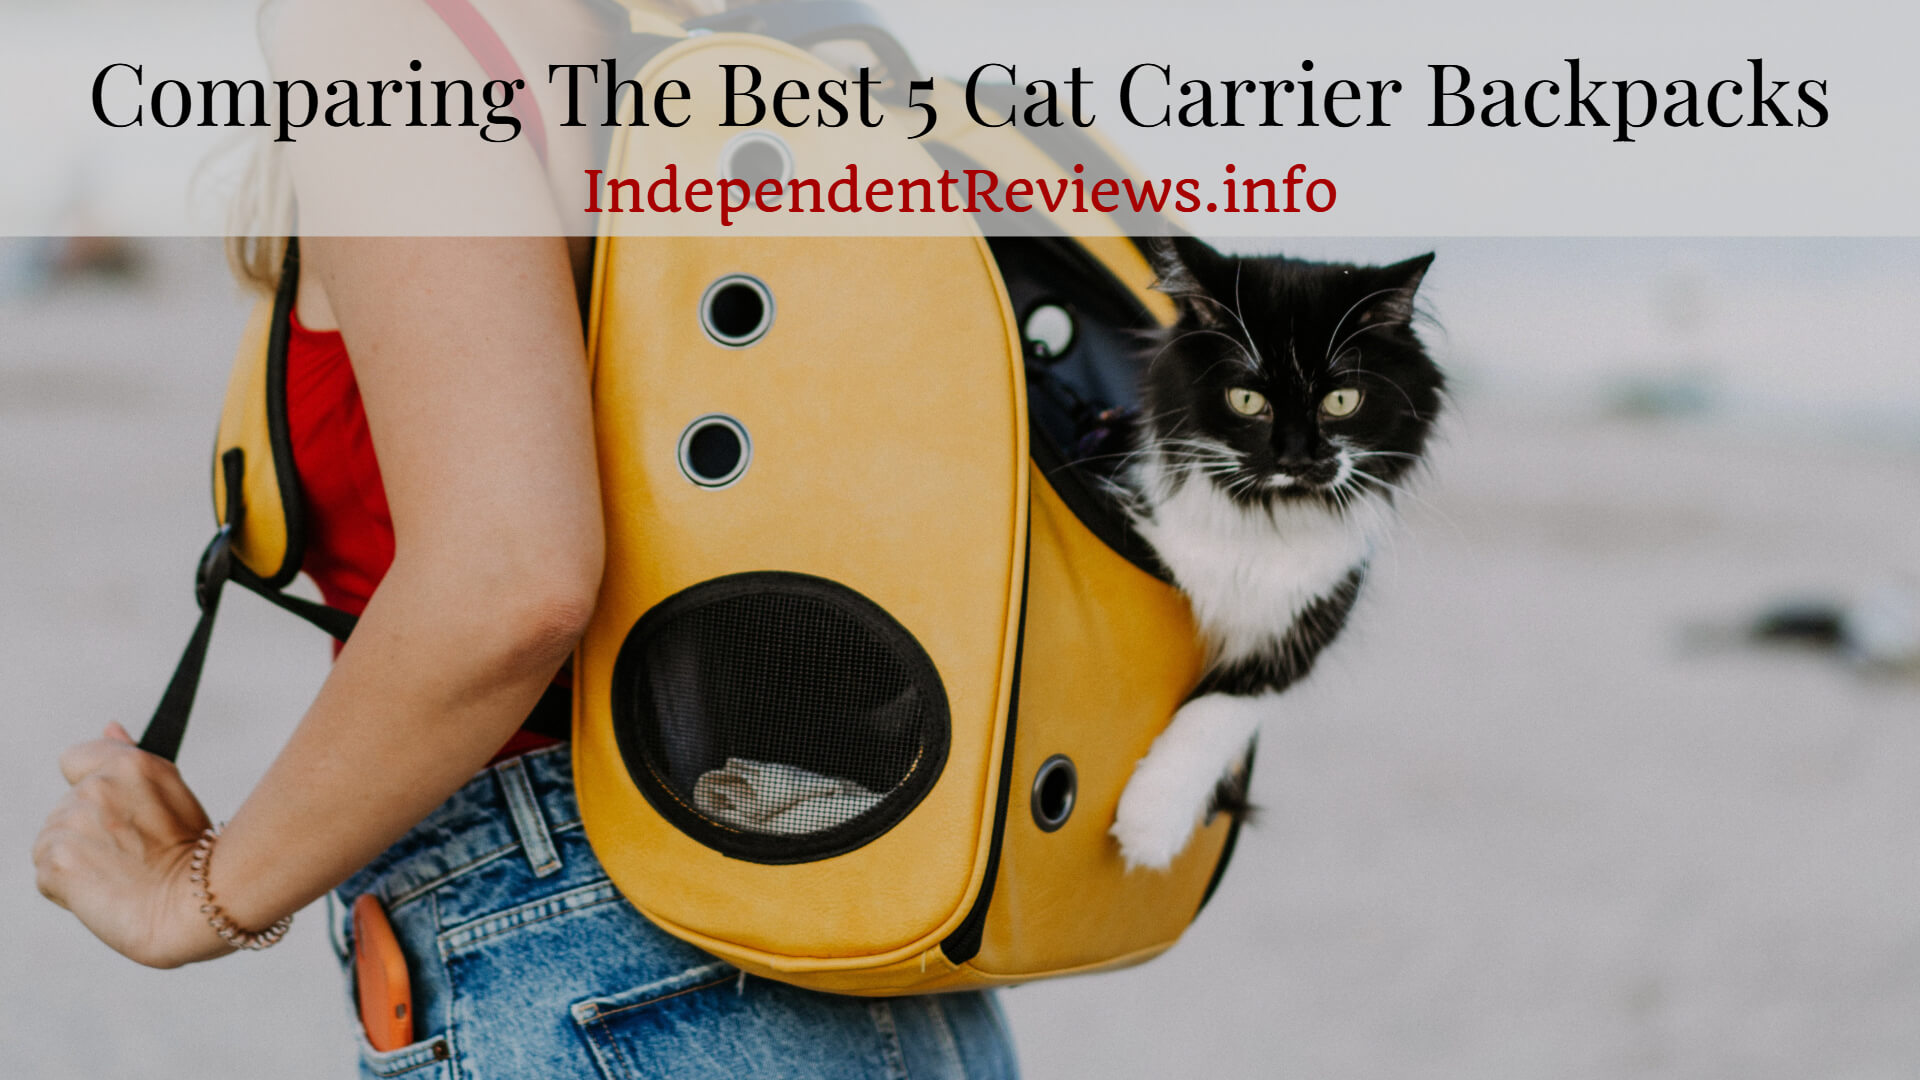 Comparing The Best 5 Cat Carrier Backpacks